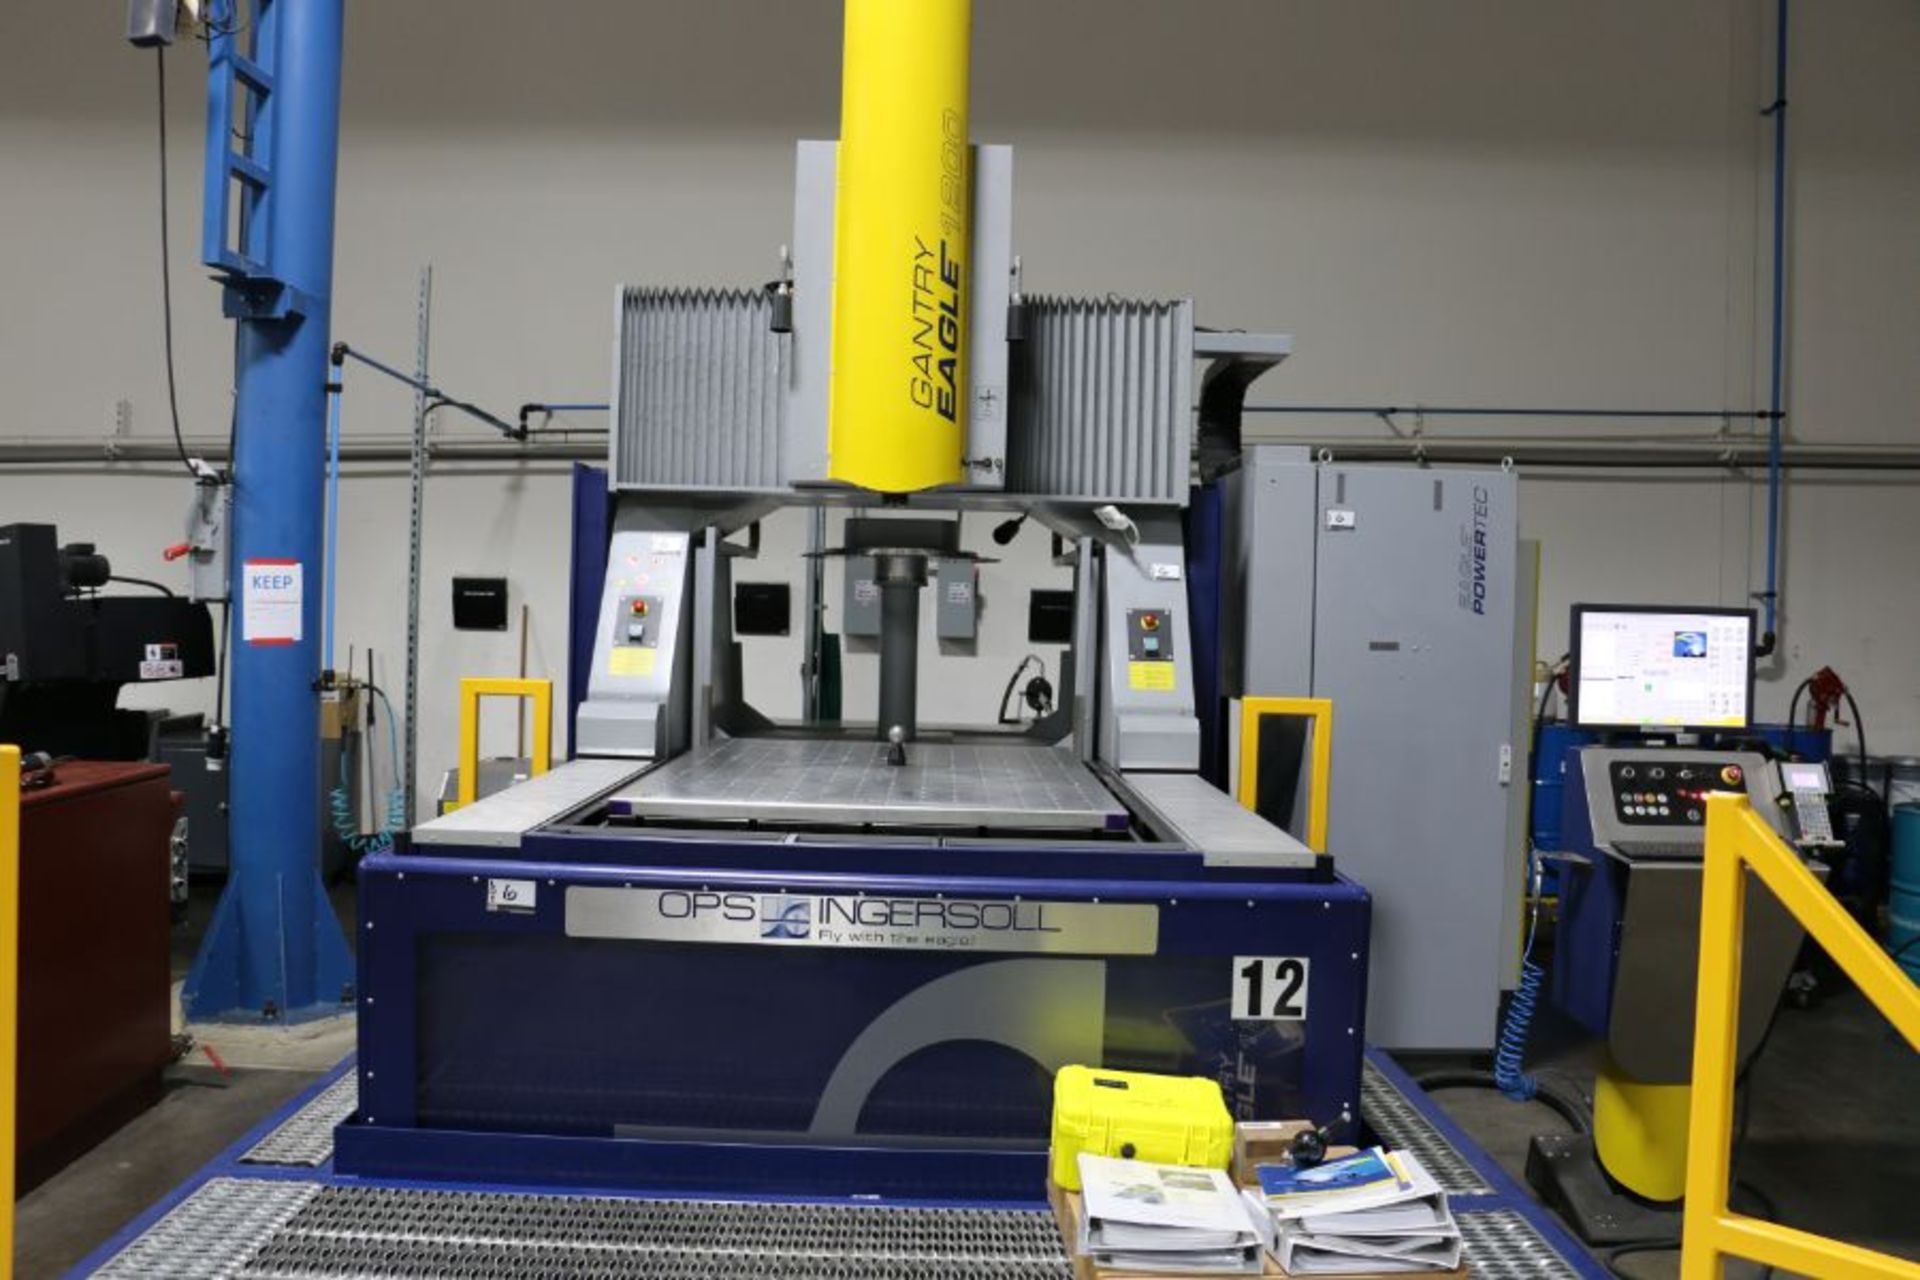 OPS Ingersoll Gantry Eagle 1200 CNC Sinker EDM, Dual 32-Bit Based Control, C-Axis, Powertec 60A - Image 2 of 18